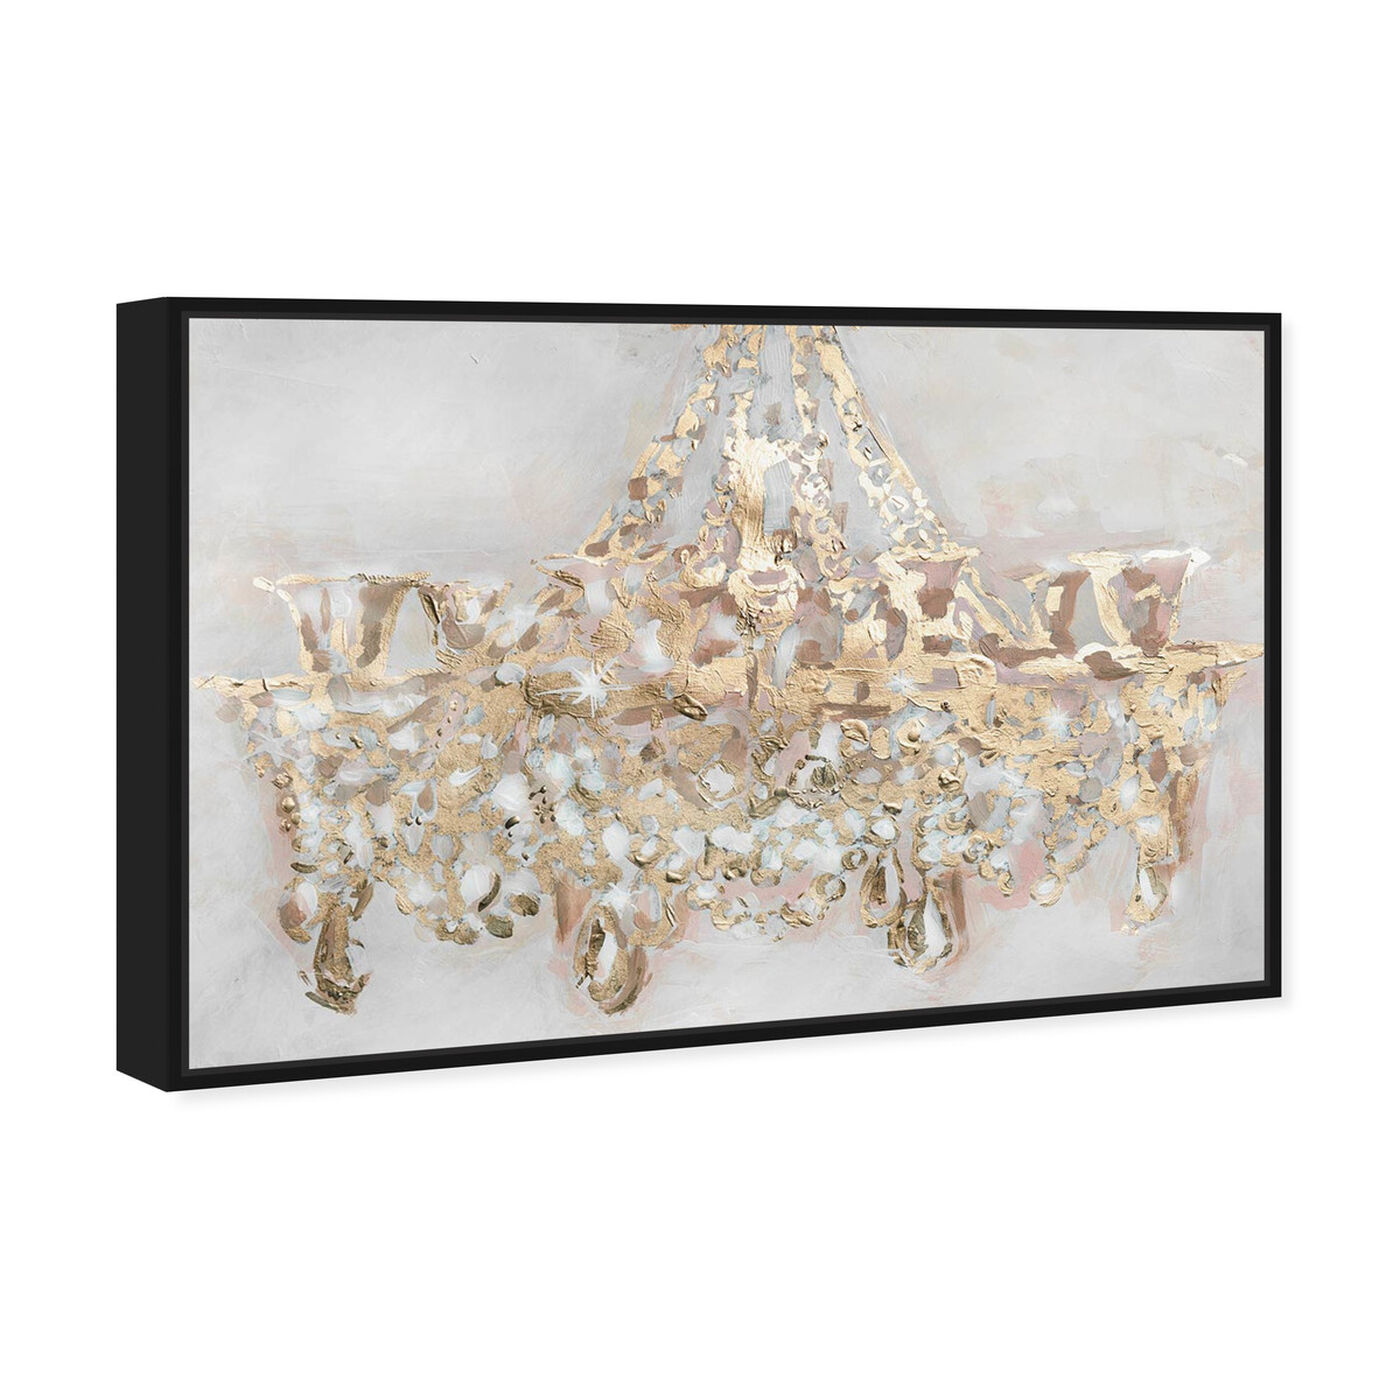 Angled view of Candelabro featuring fashion and glam and chandeliers art.